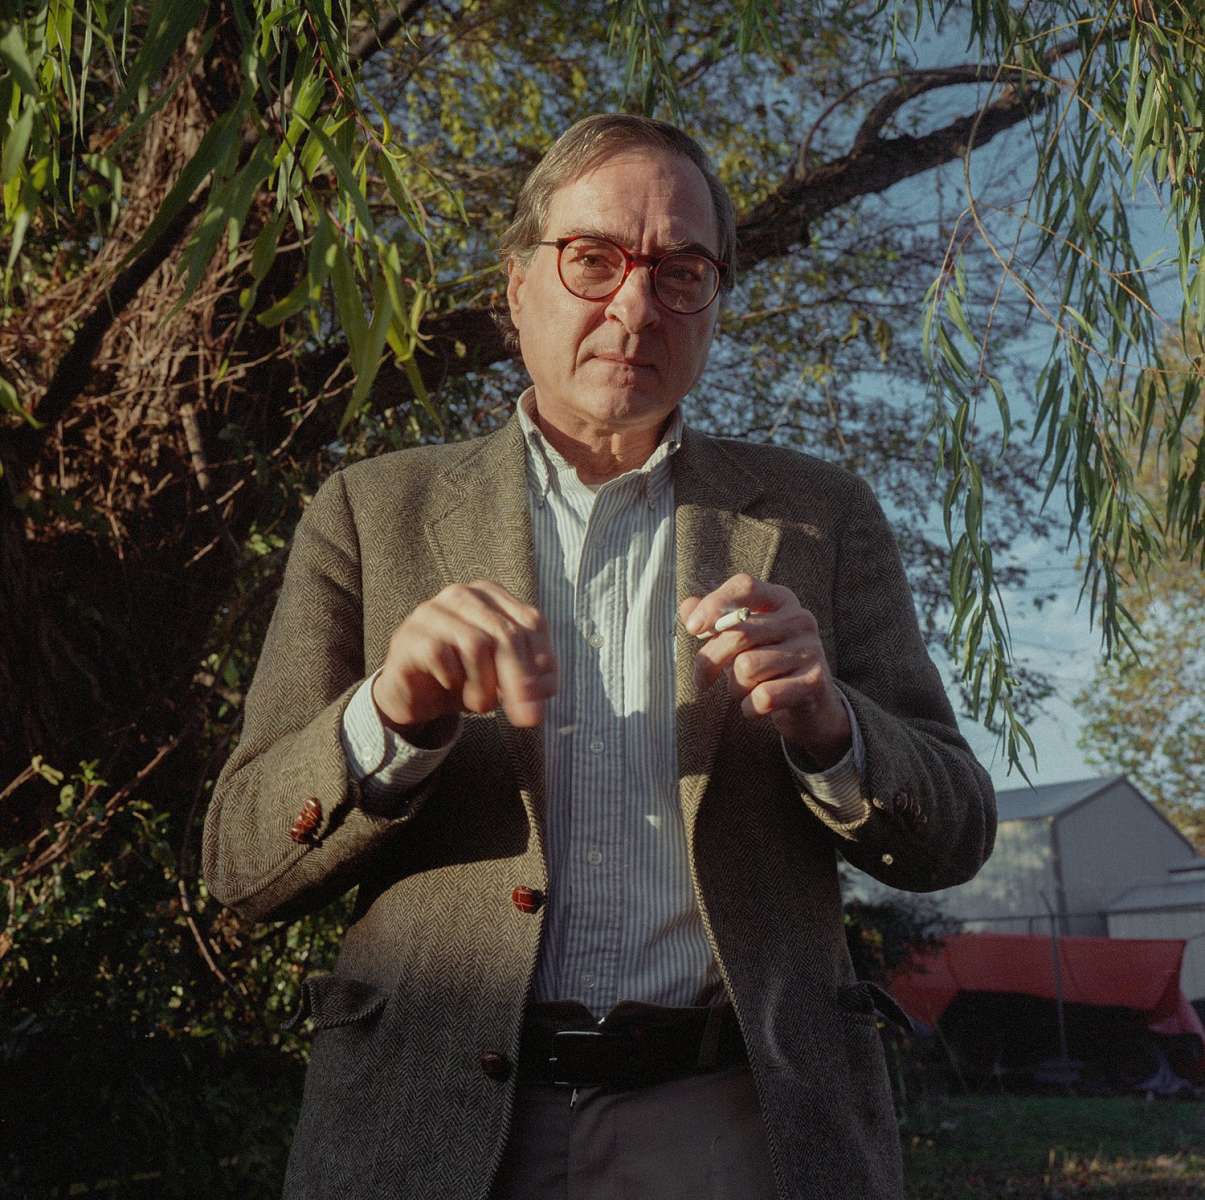 My Cousin Bill A Conversation with William Eggleston